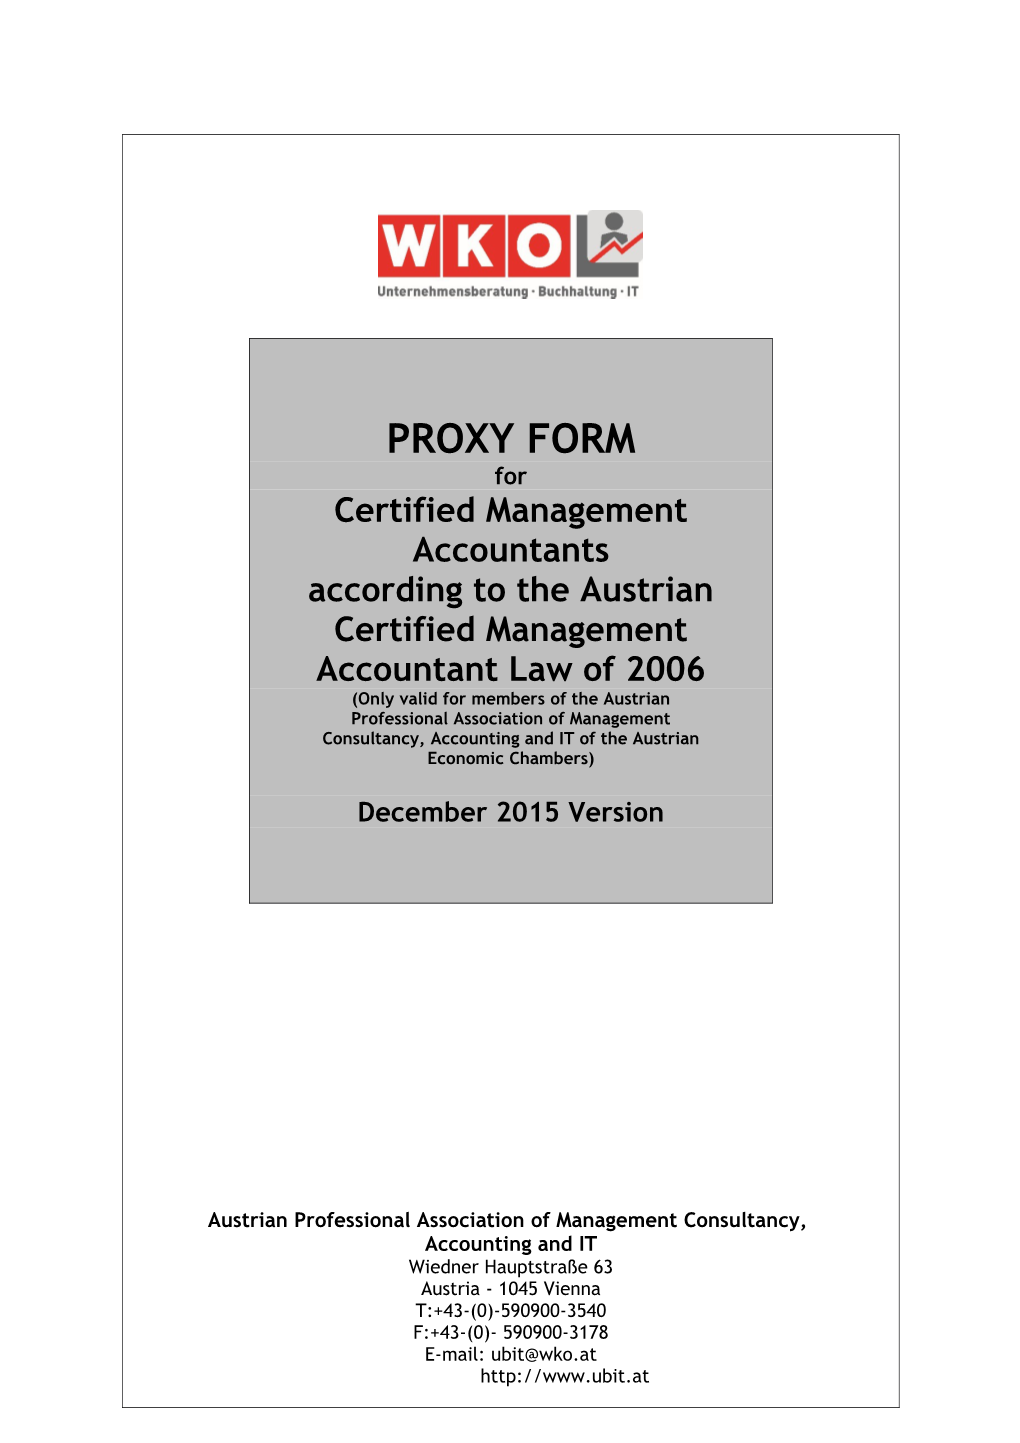 According to the Austrian Certified Management Accountant Law of 2006